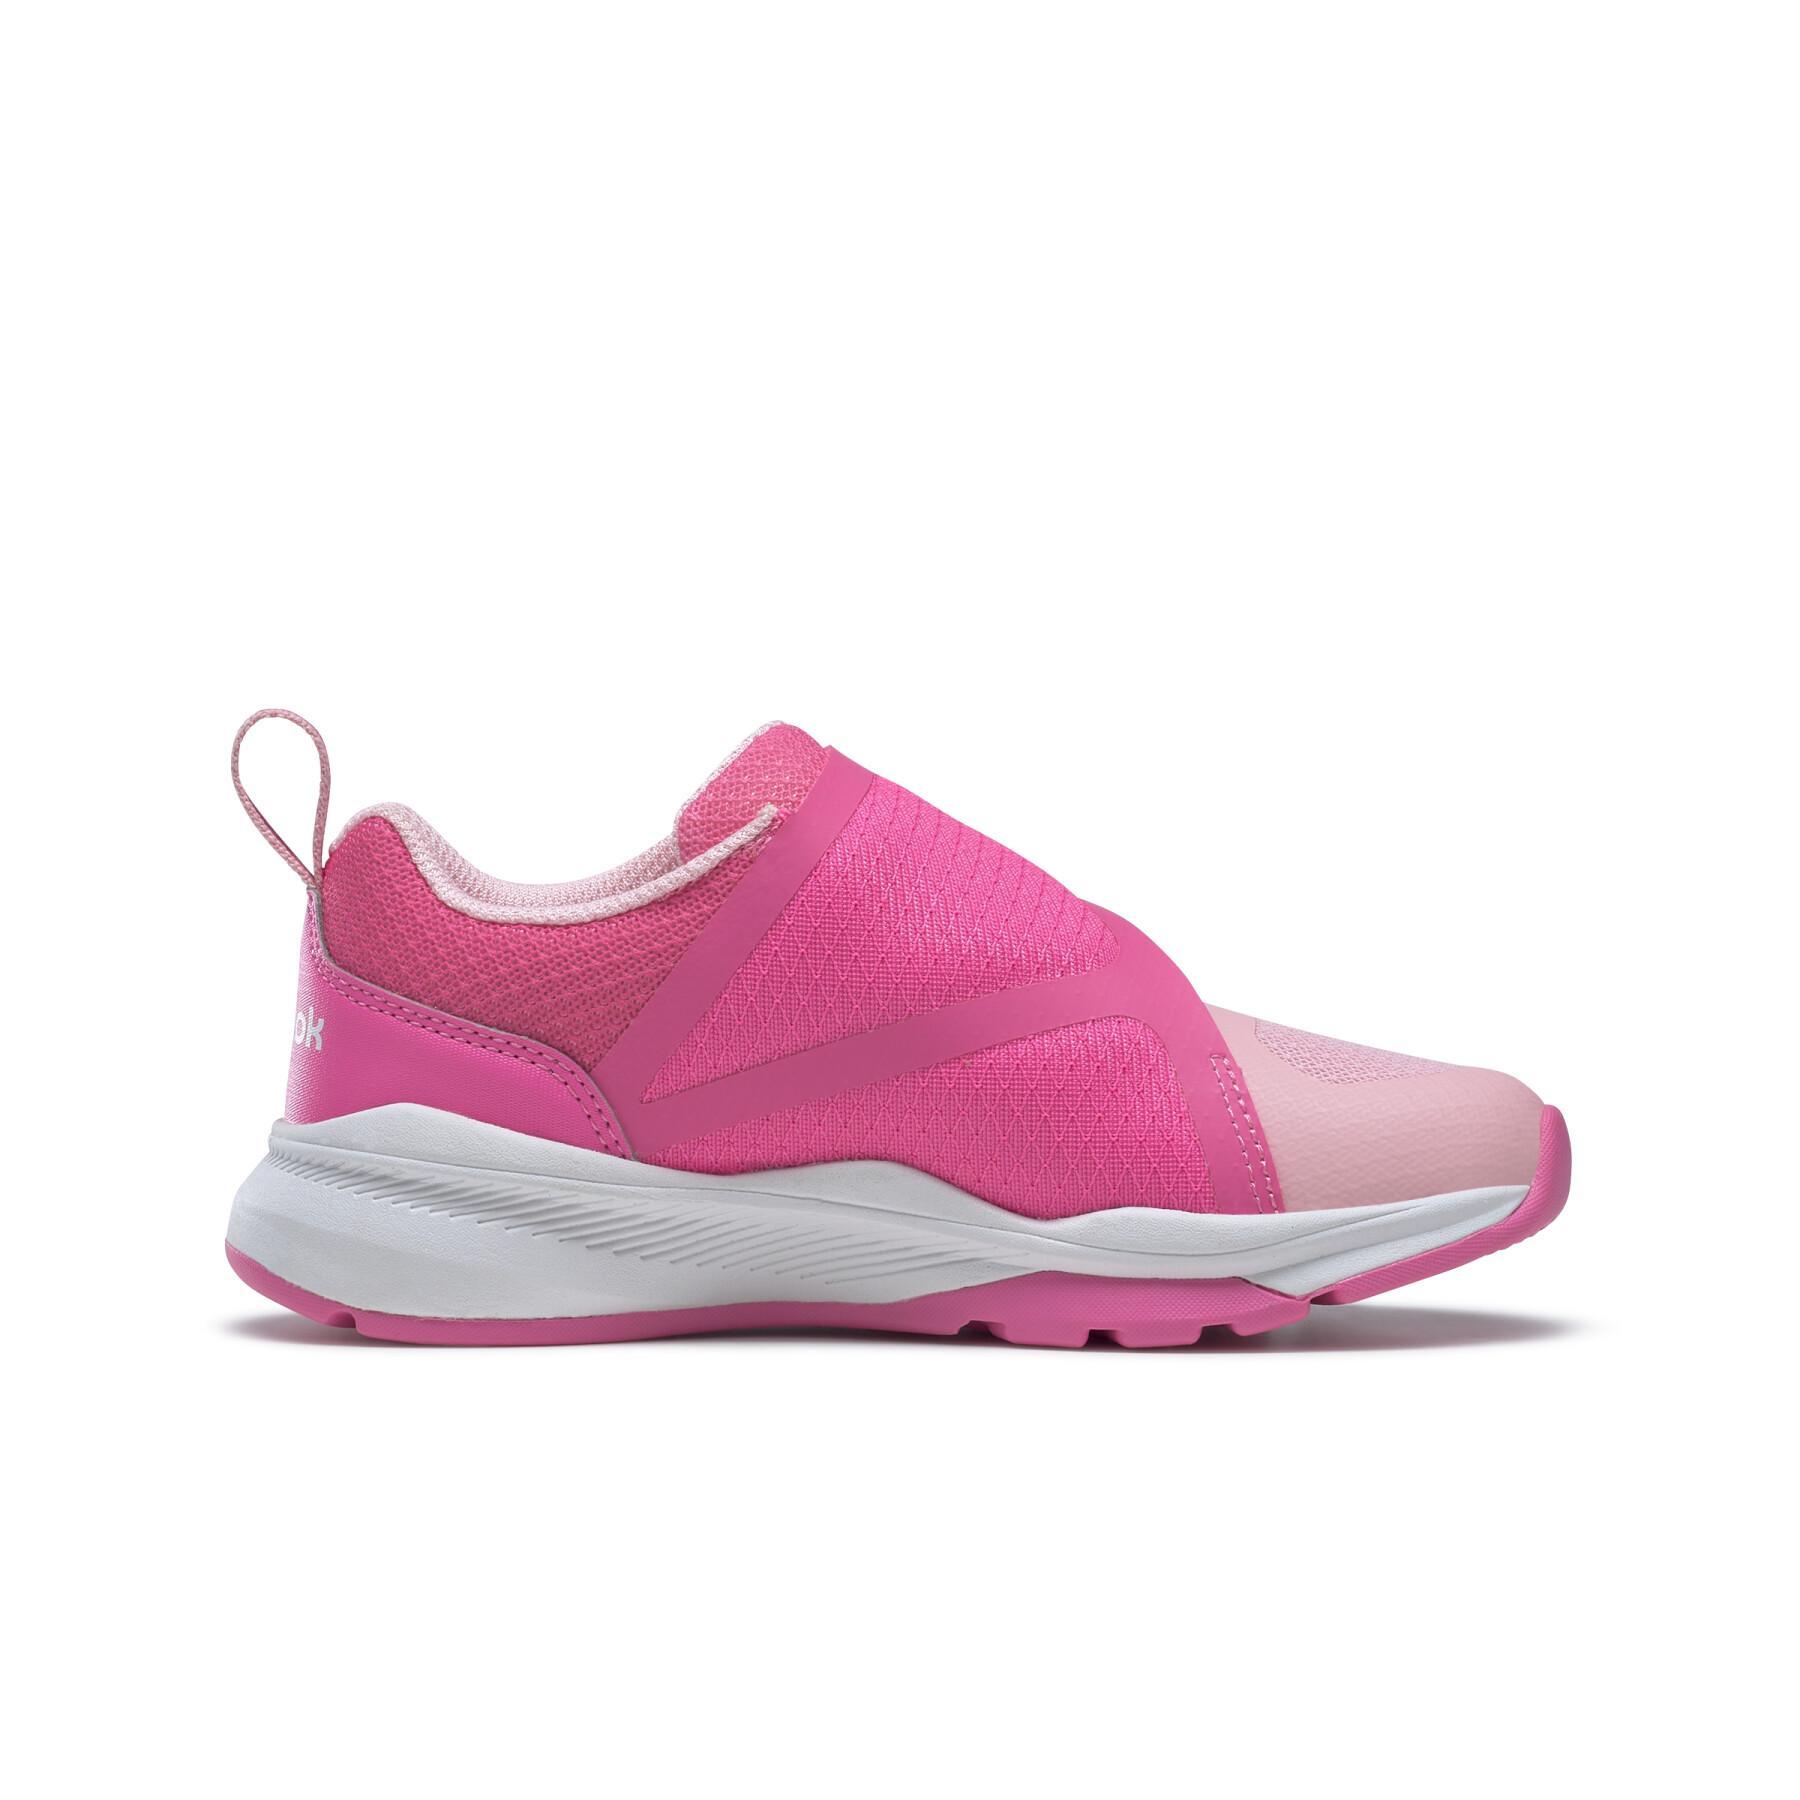 Children's running shoes Reebok Equal Fit